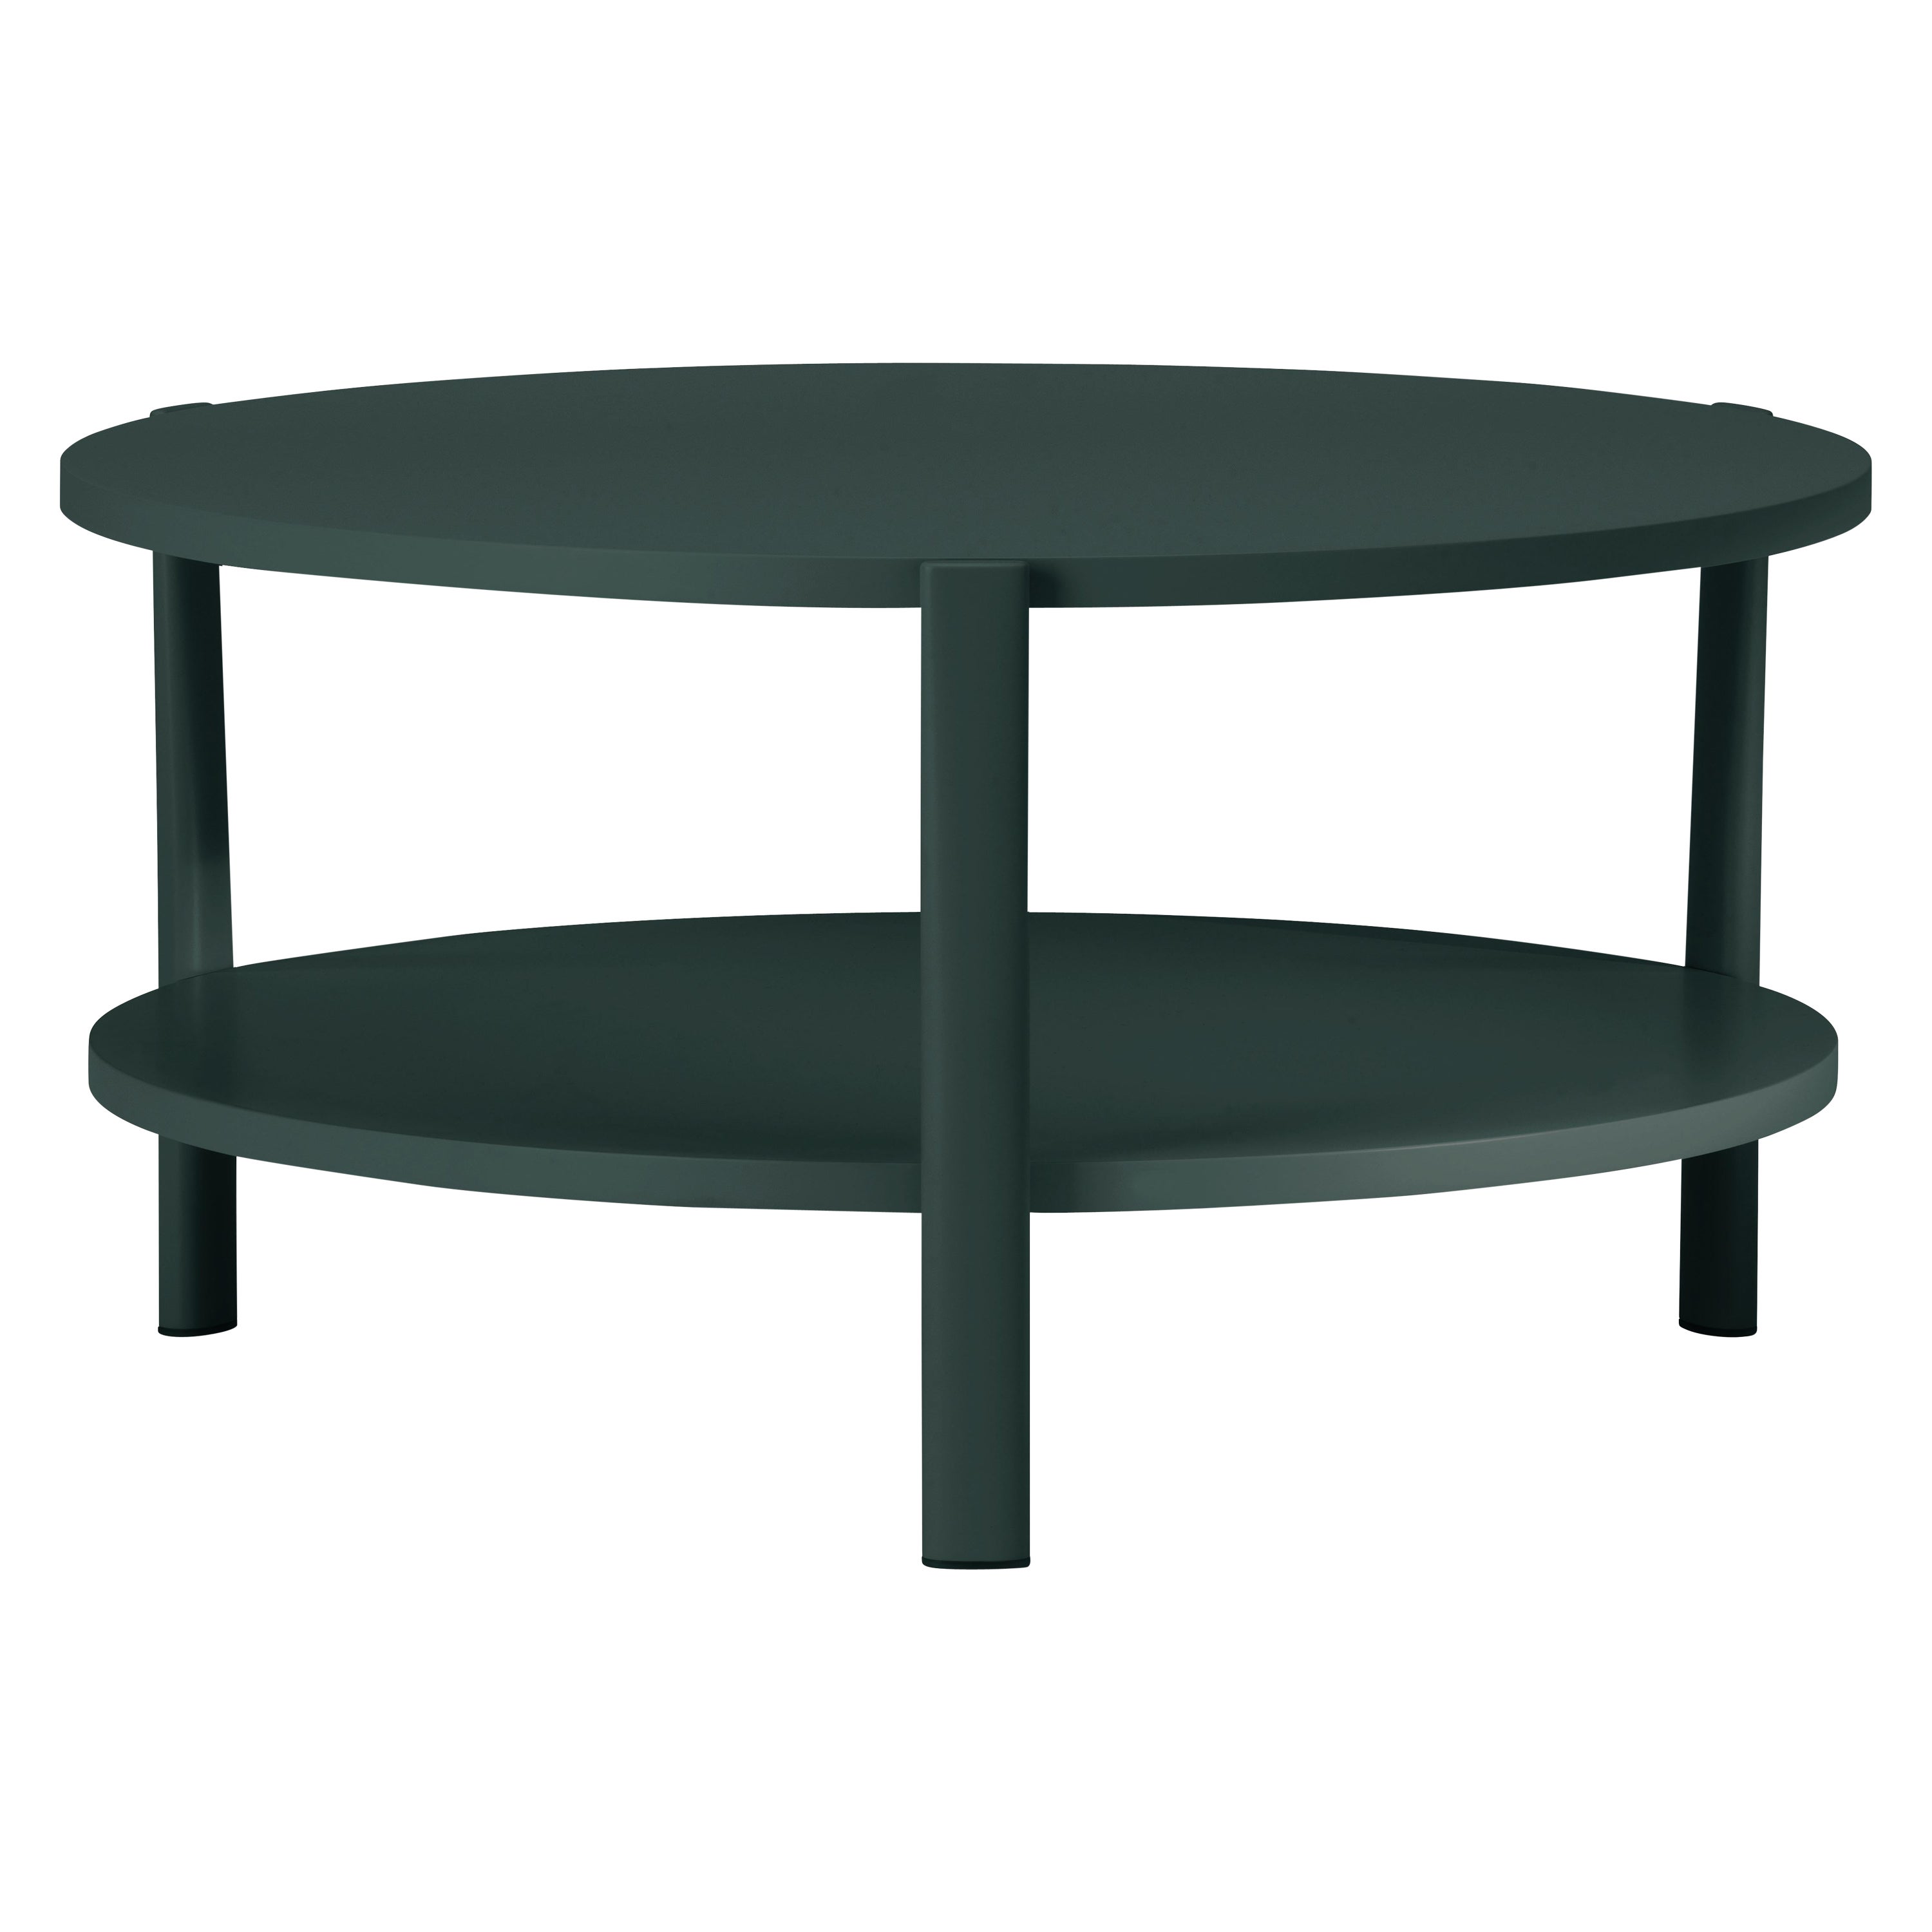 Alias 954 Eleven Low Table Double Round in Graphite Grey Lacquered Frame For Sale